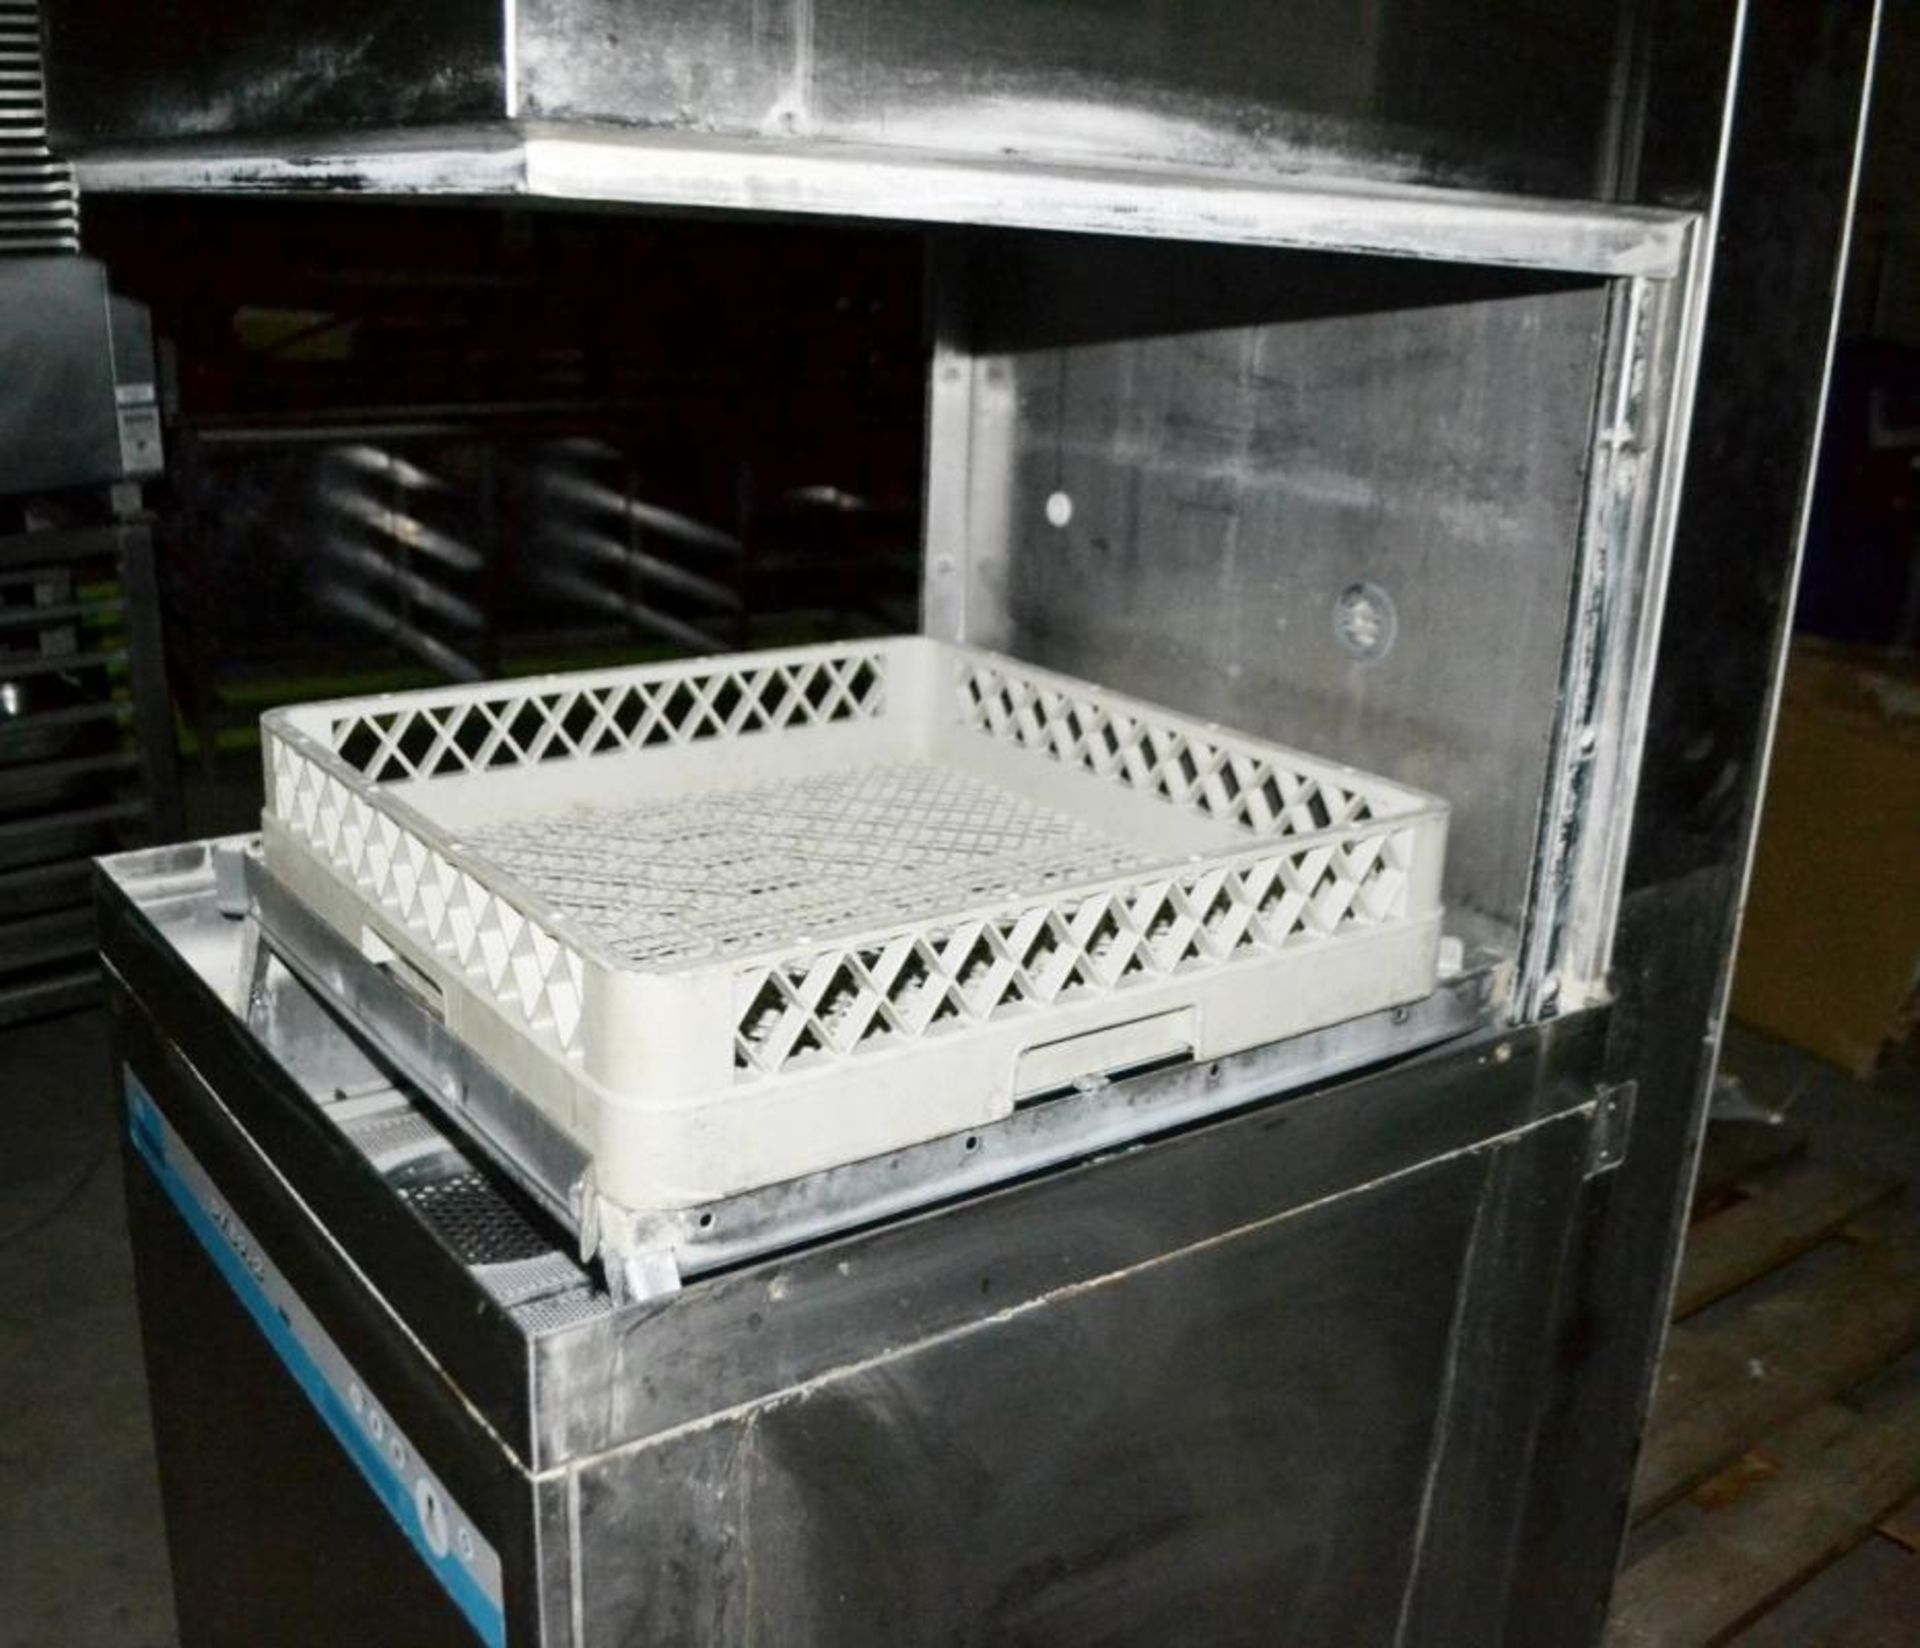 1 x MEIKO DV80.2 Pass Through Commercial Dishwasher - CL011 - Ref: 220 - Location: Altrincham - Image 5 of 5